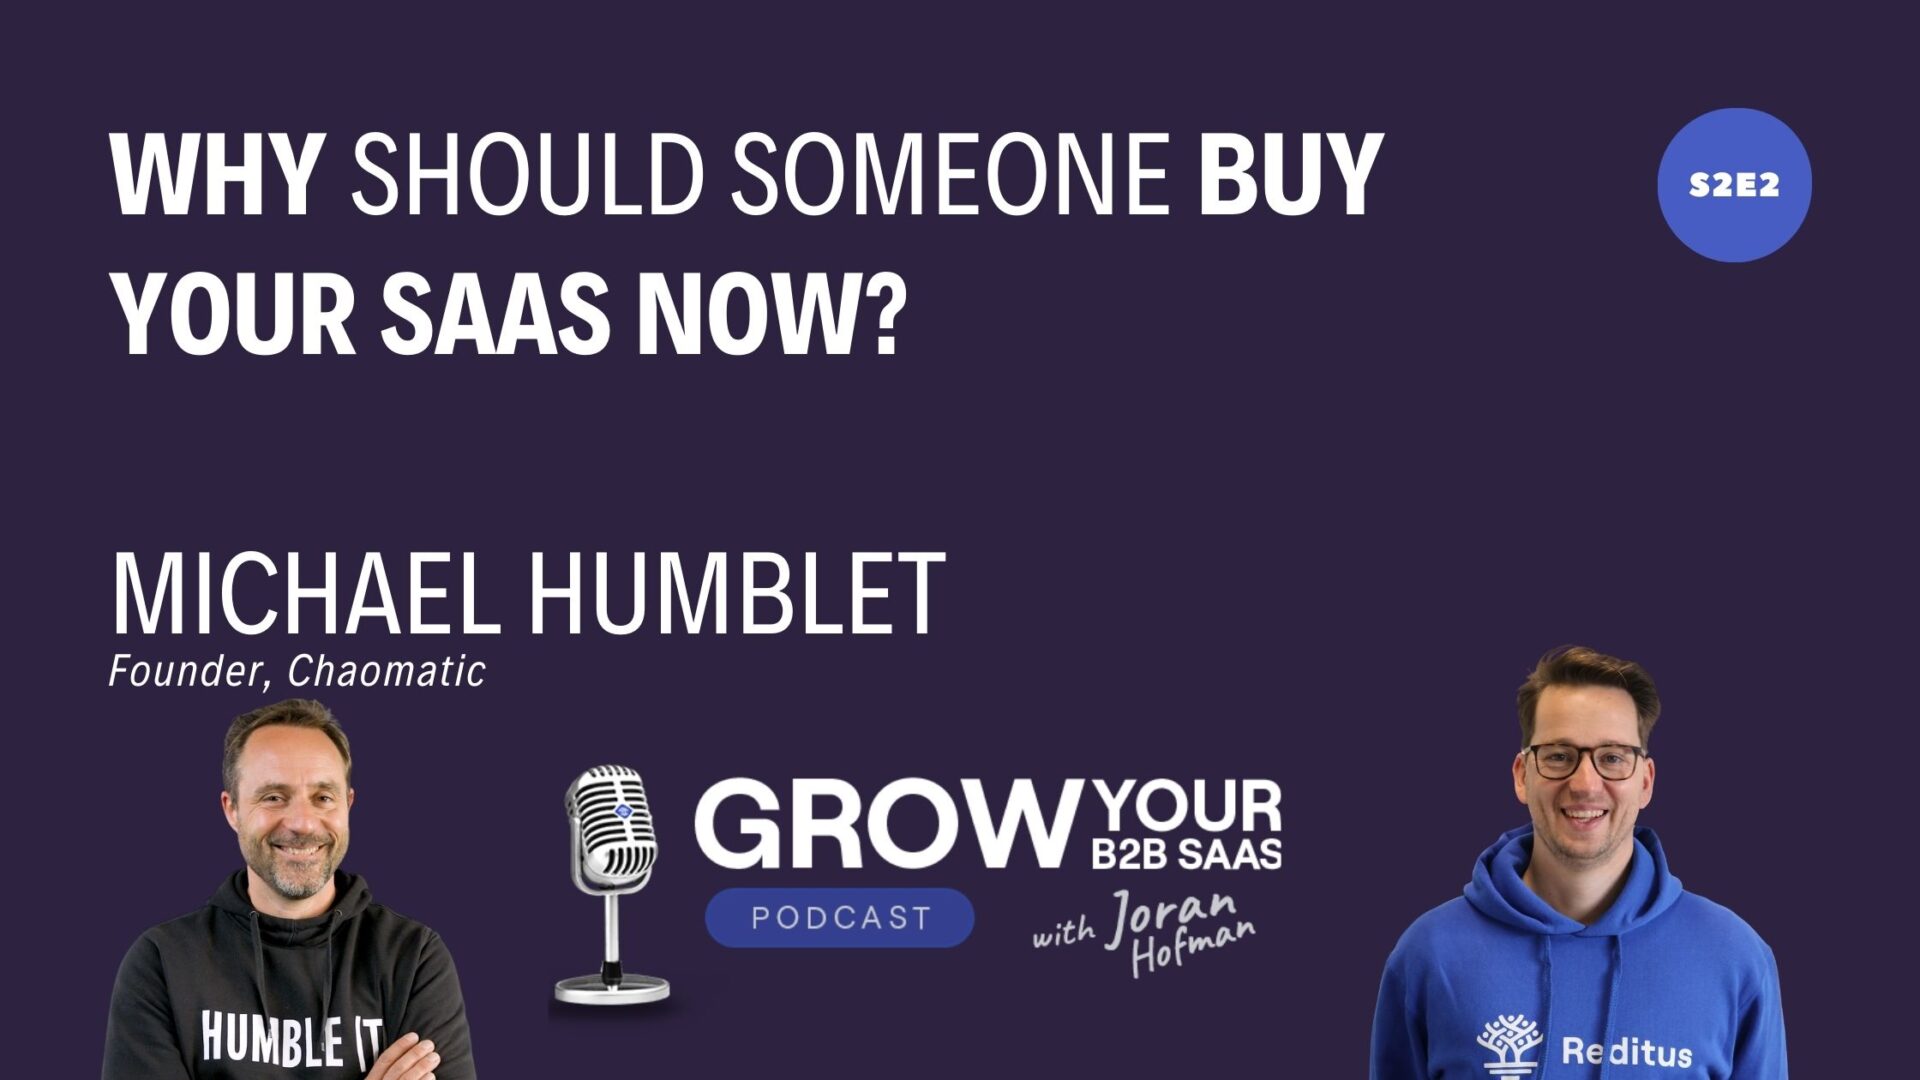 https://www.getreditus.com/podcast/why-should-someone-buy-your-saas-now/